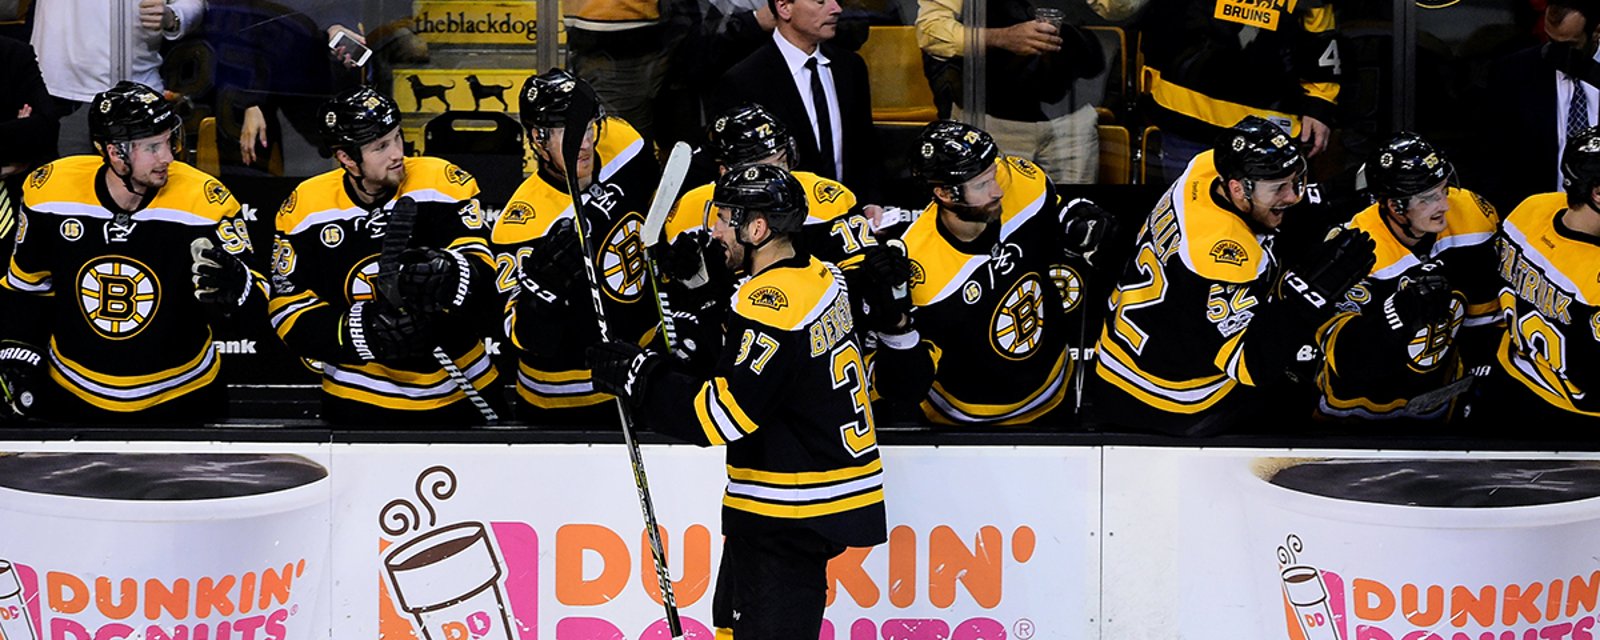 Breaking: Bruins hire former NHLer to join coaching staff